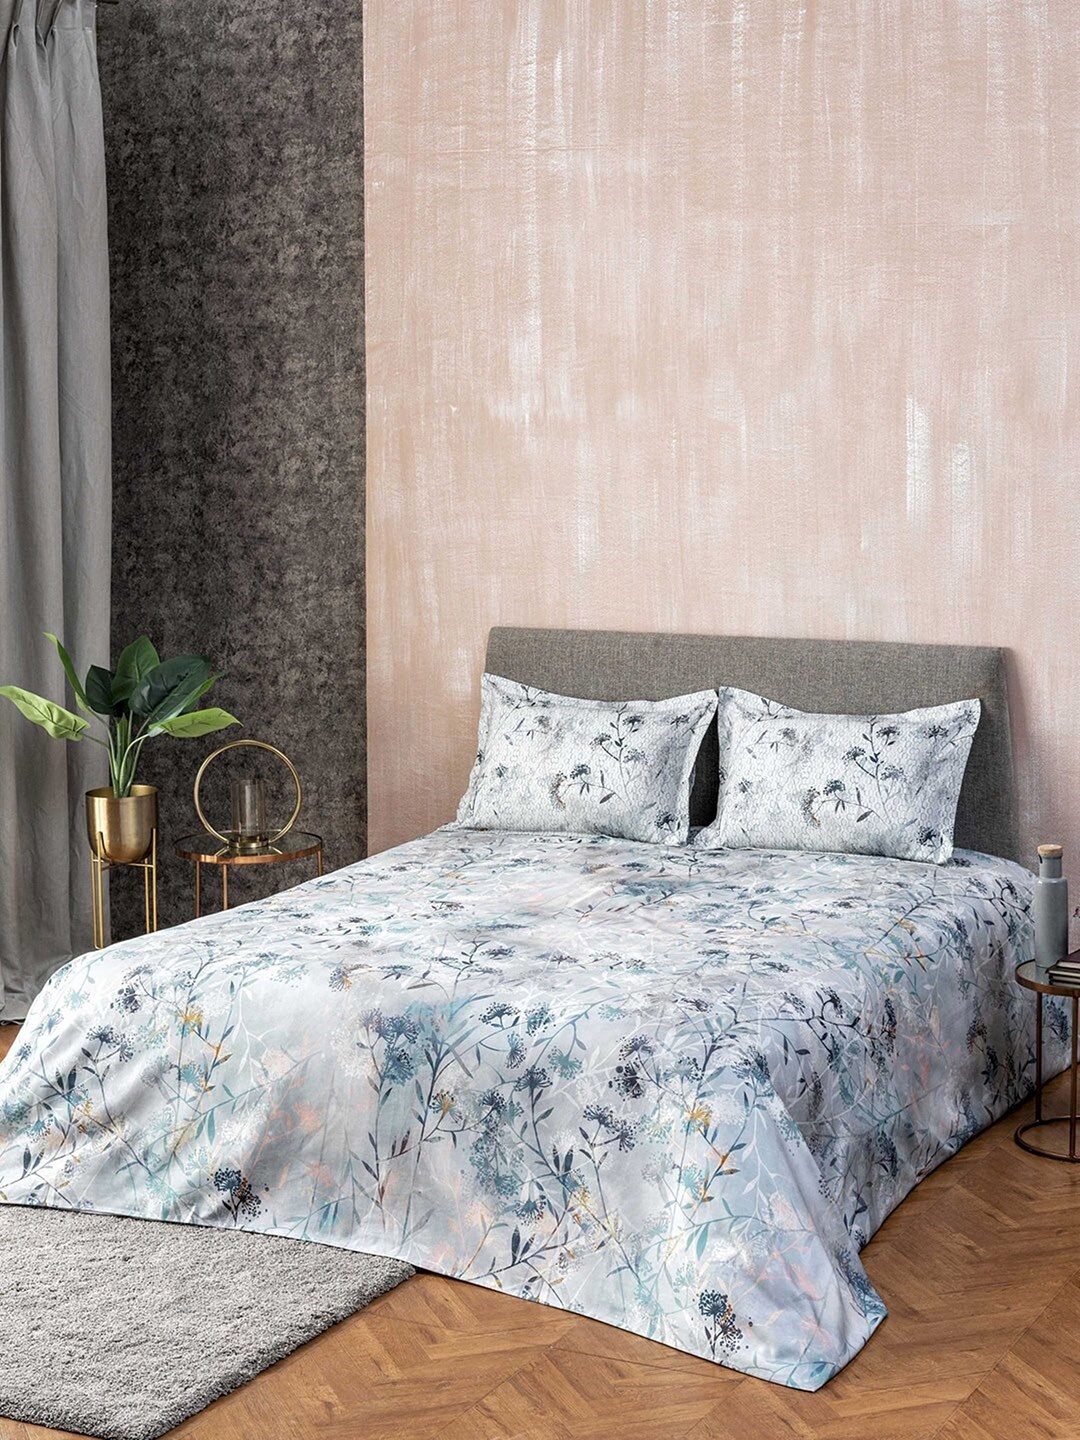 DDecor Grey & Blue Floral Printed King Size Double Cotton Bed Cover With 2 Pillow Covers Price in India